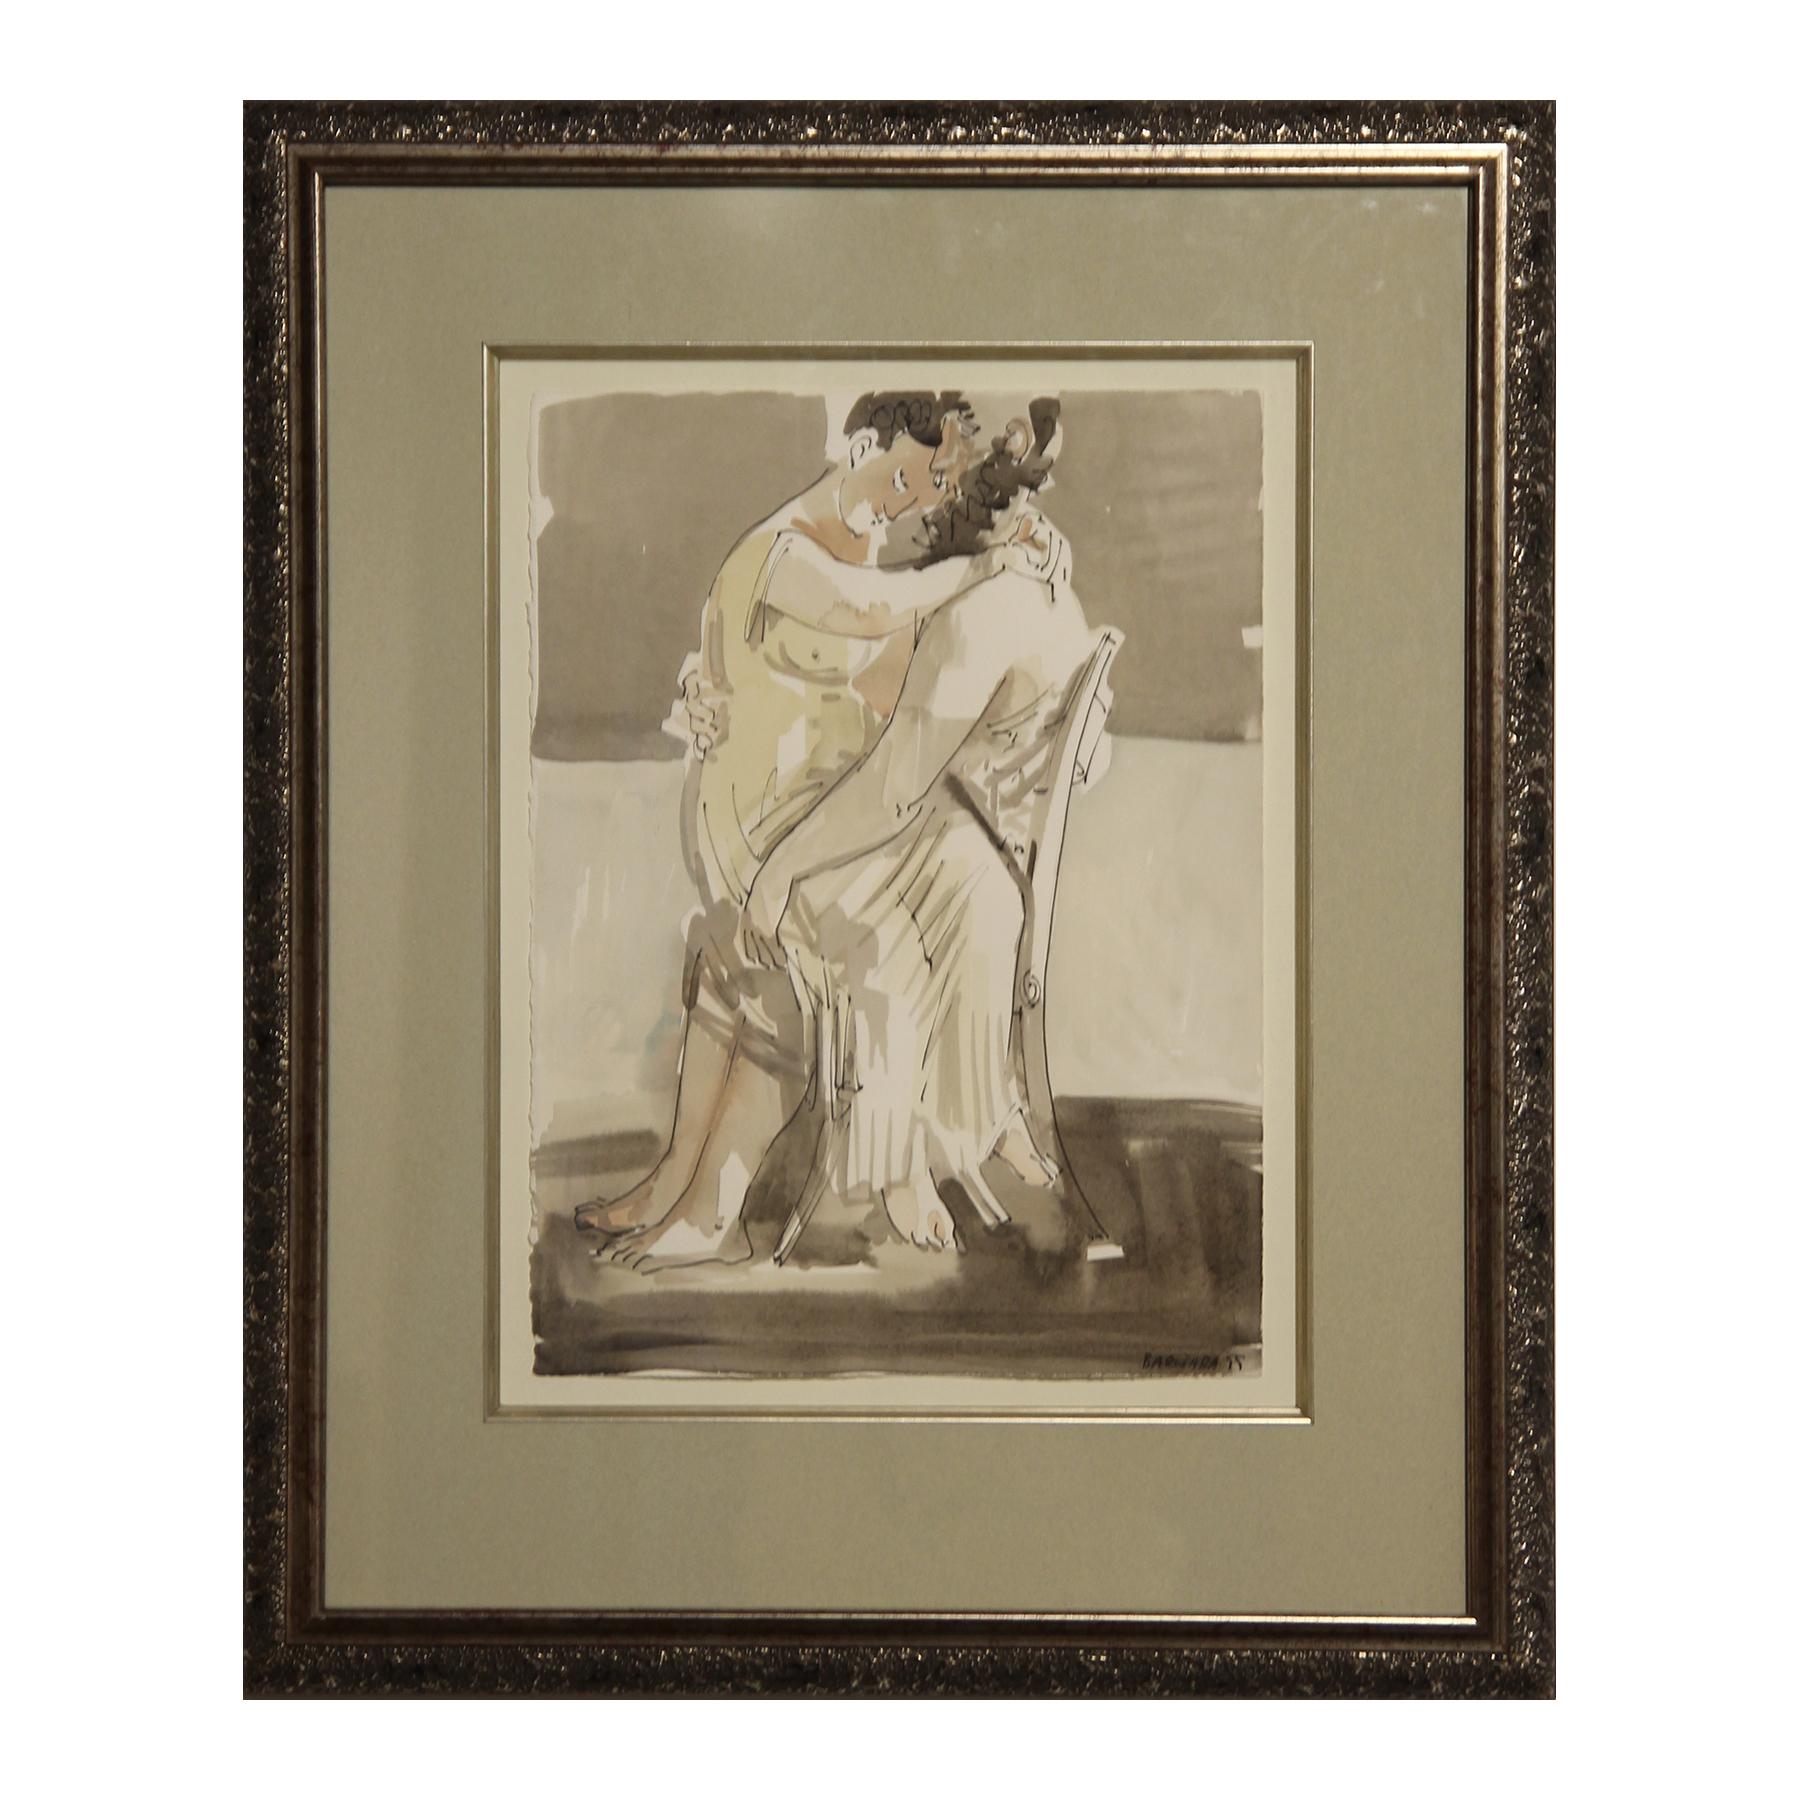 Barnaby Fitzgerald Figurative Art - "Seated Lovers" Abstract Grey-Toned Watercolor of Two Embracing Seated Figures 